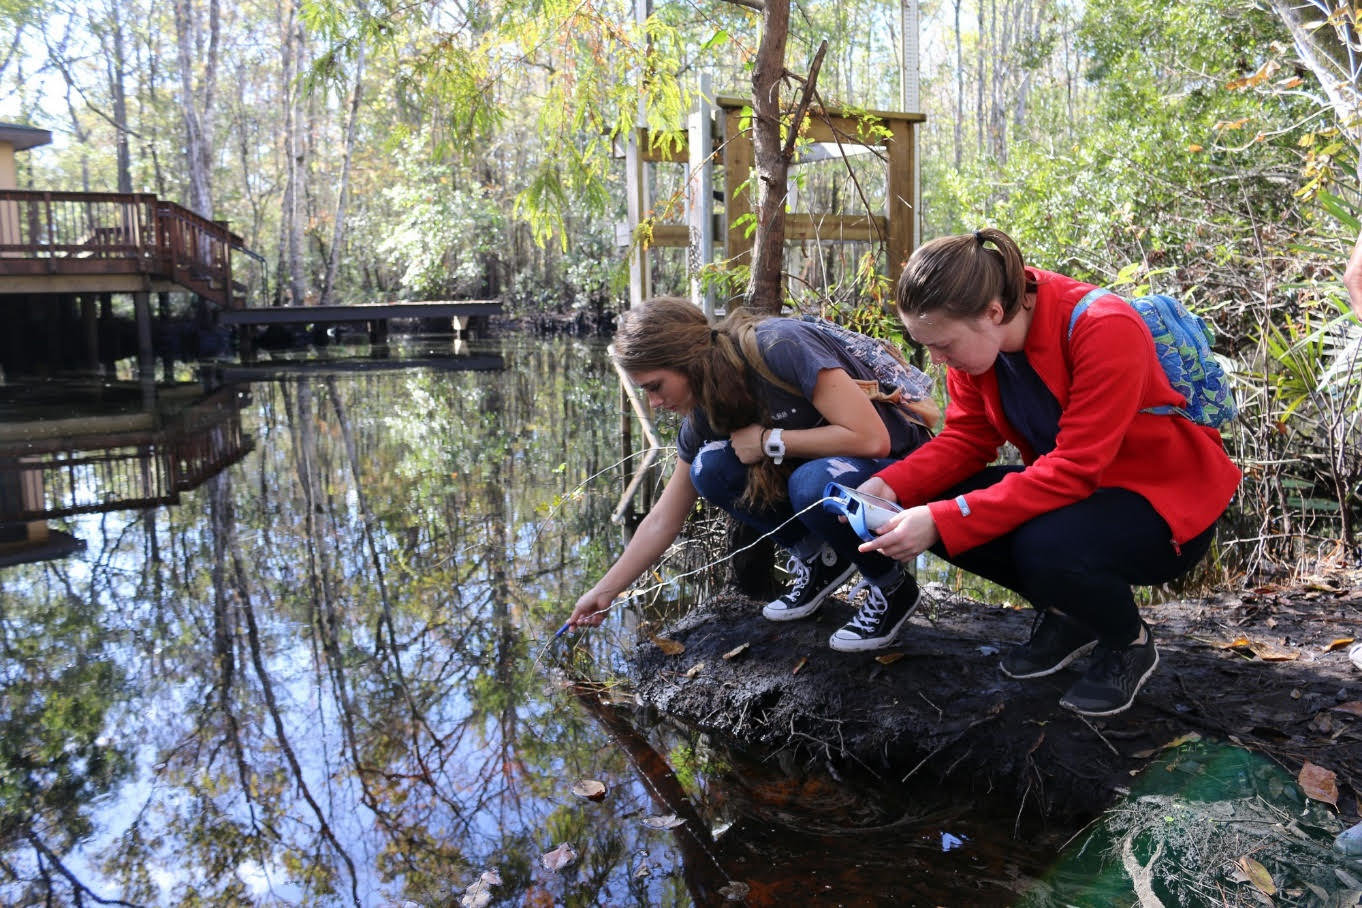 High school students participating in water quality sampling and monitoring through the District’s Blue School Grant Program.